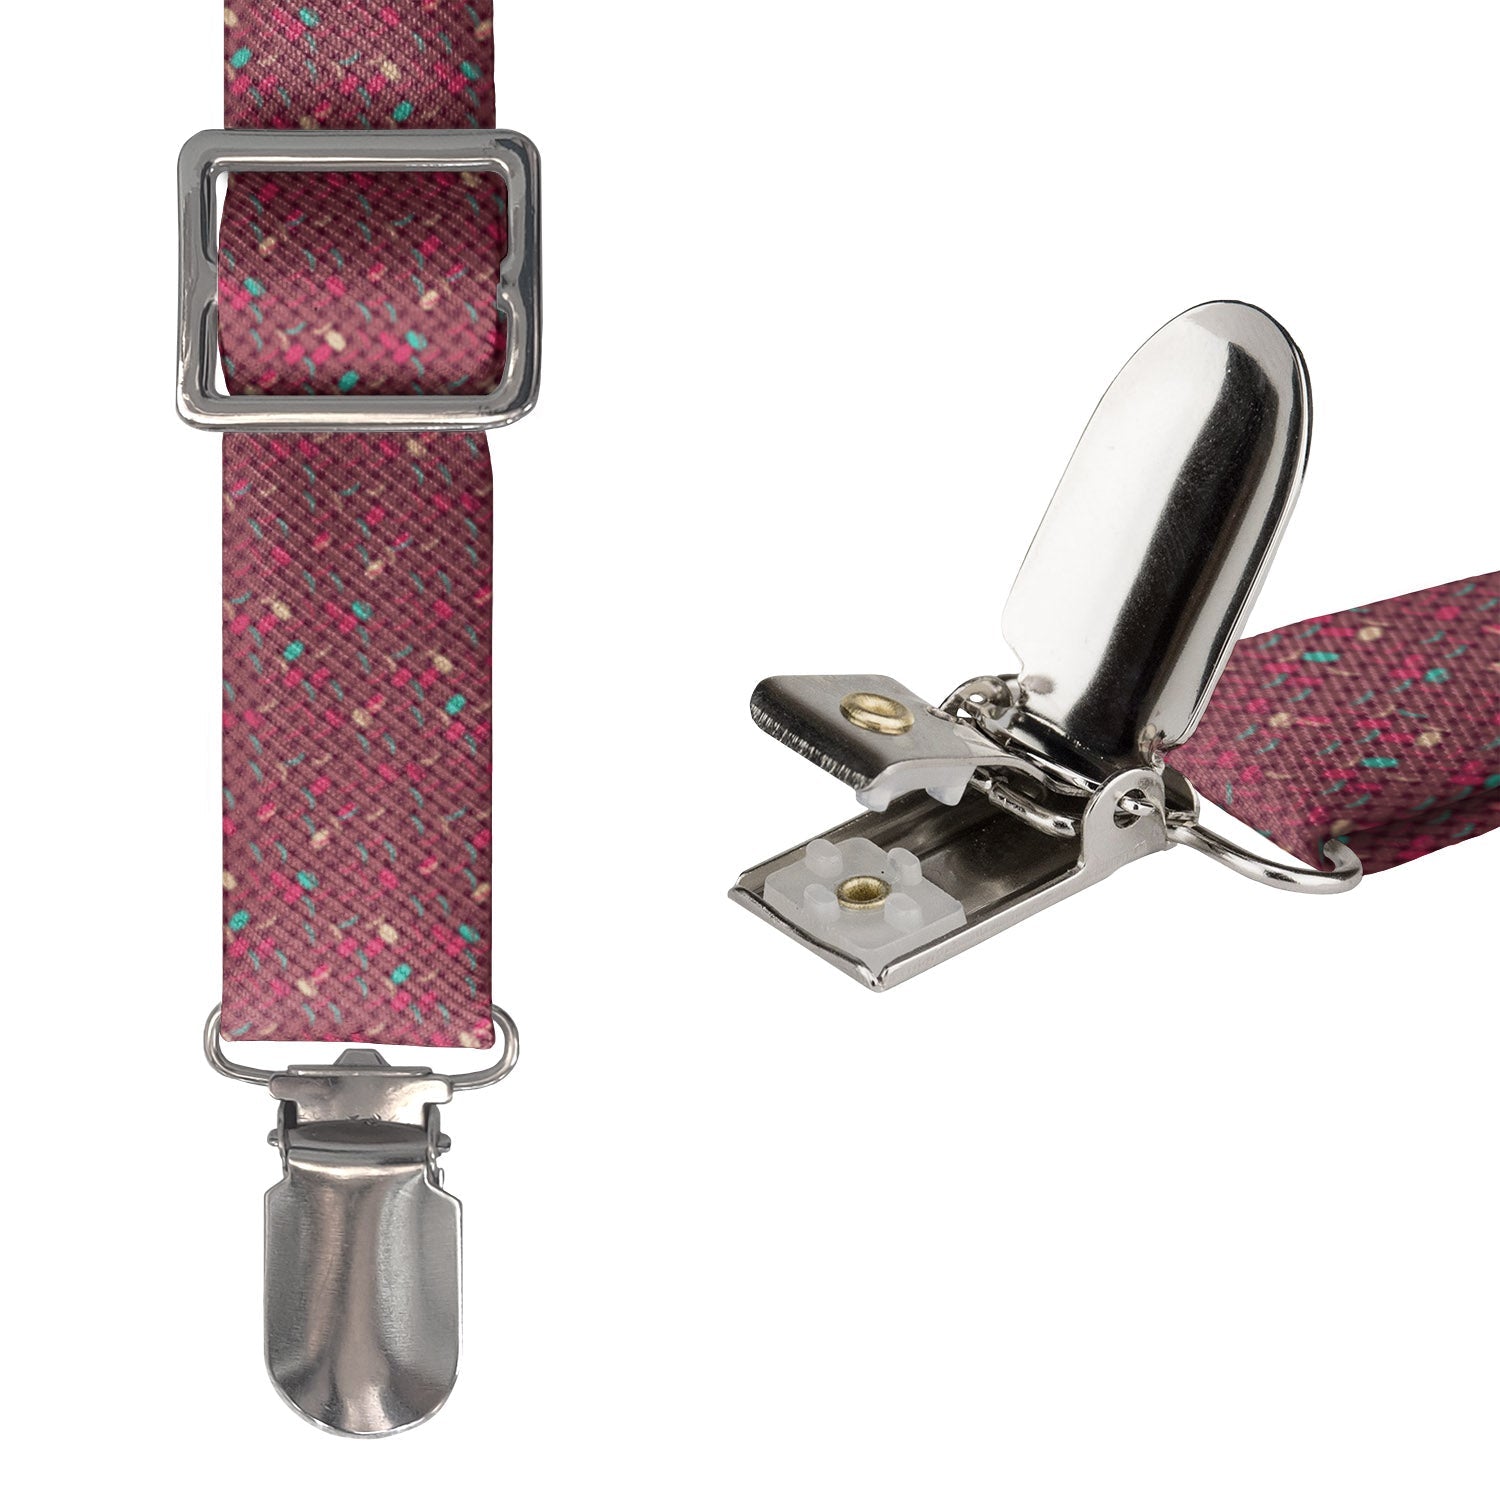 Speckled Suspenders -  -  - Knotty Tie Co.